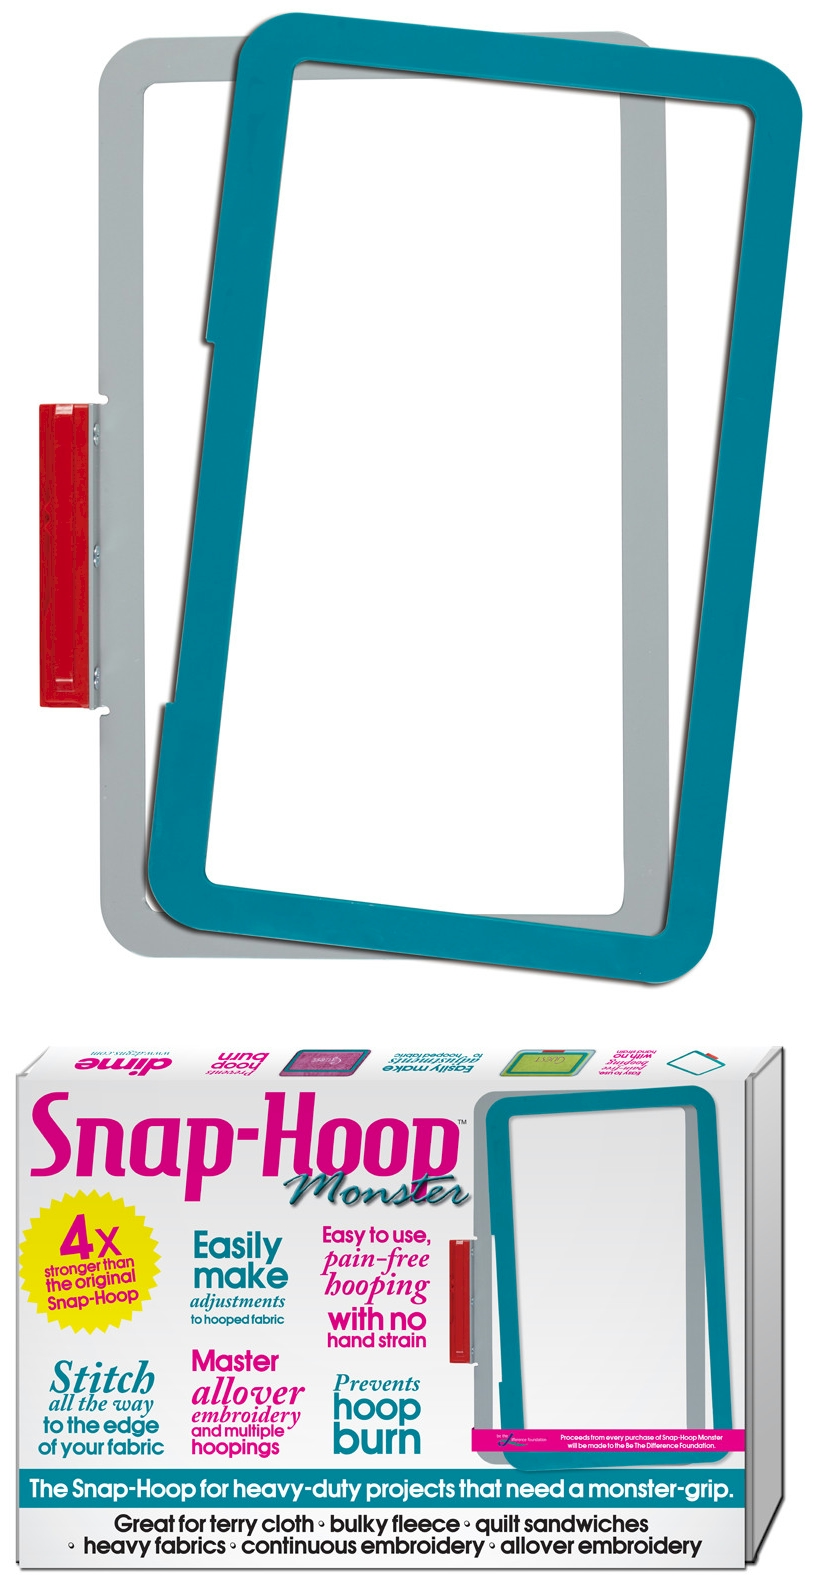 Snap-Hoop MONSTER - 4"x4" for BABY LOCK & BROTHER Embroidery Machines by Designs in Machine Embroidery